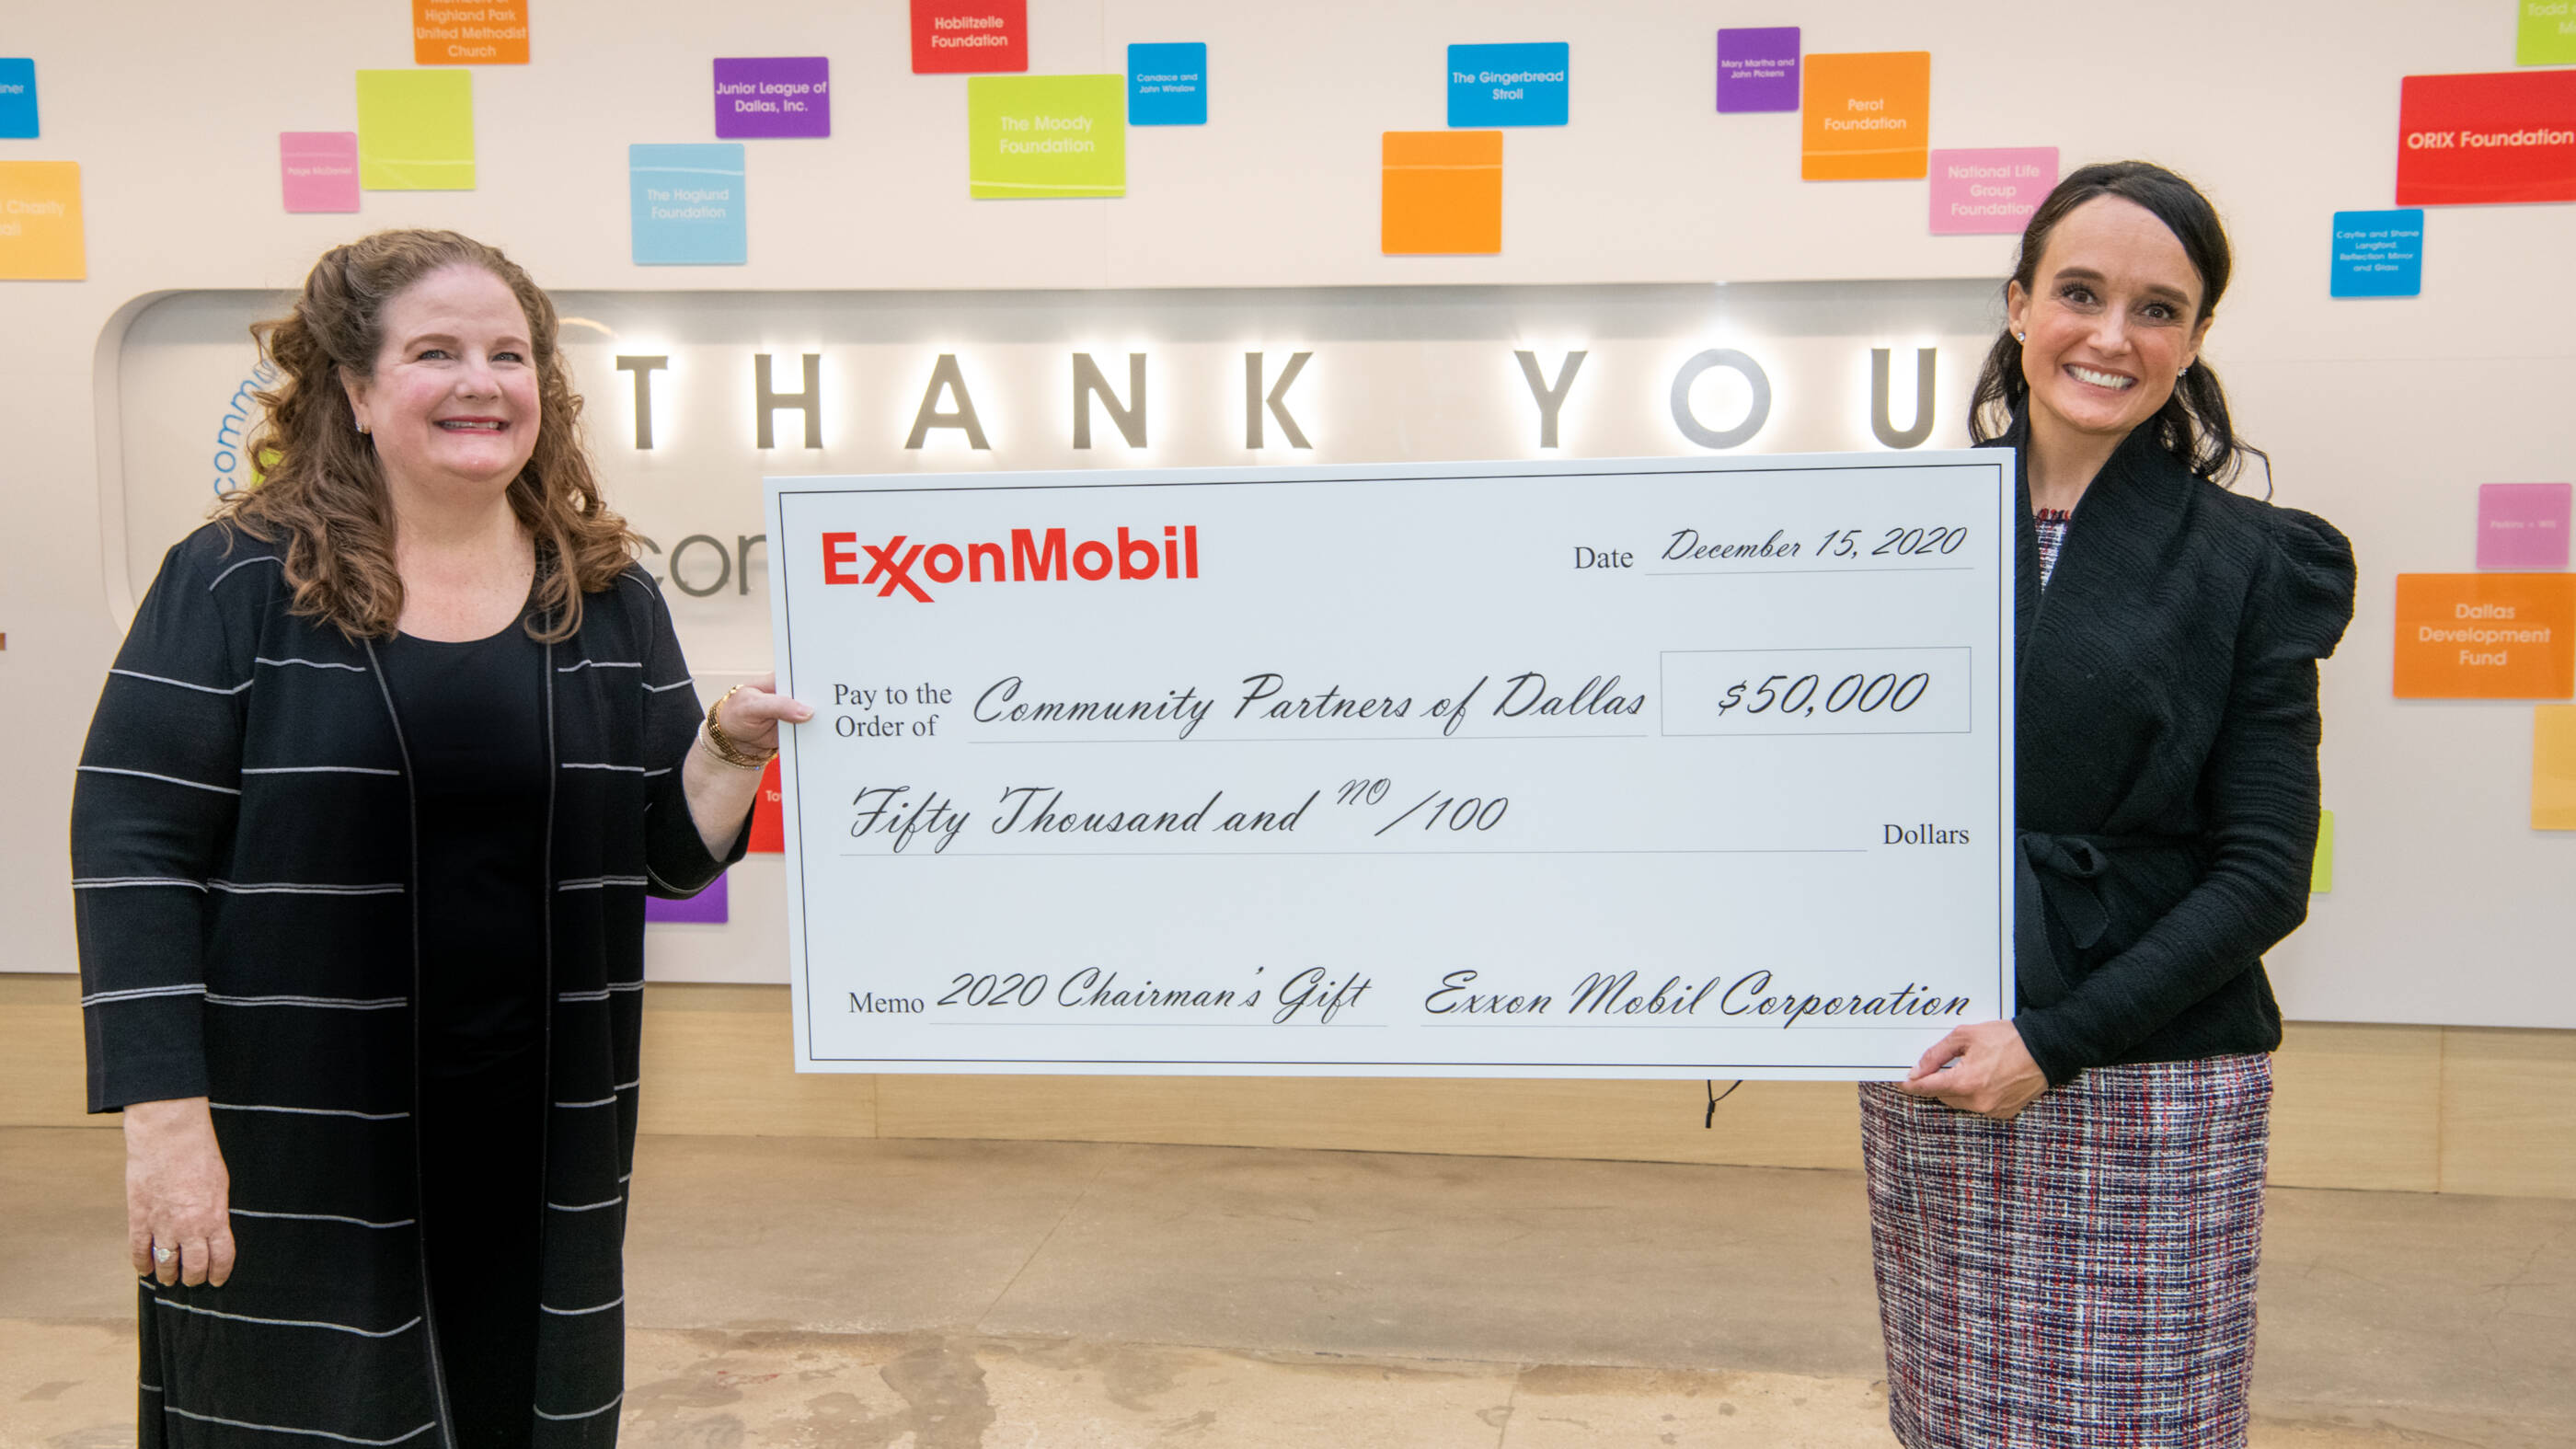 Paige McDaniel, president and chief executive officer of Community Partners of Dallas, and Joanna Clarke, vice president of development and communications of Community Partners of Dallas, receive $50,000 from ExxonMobil.